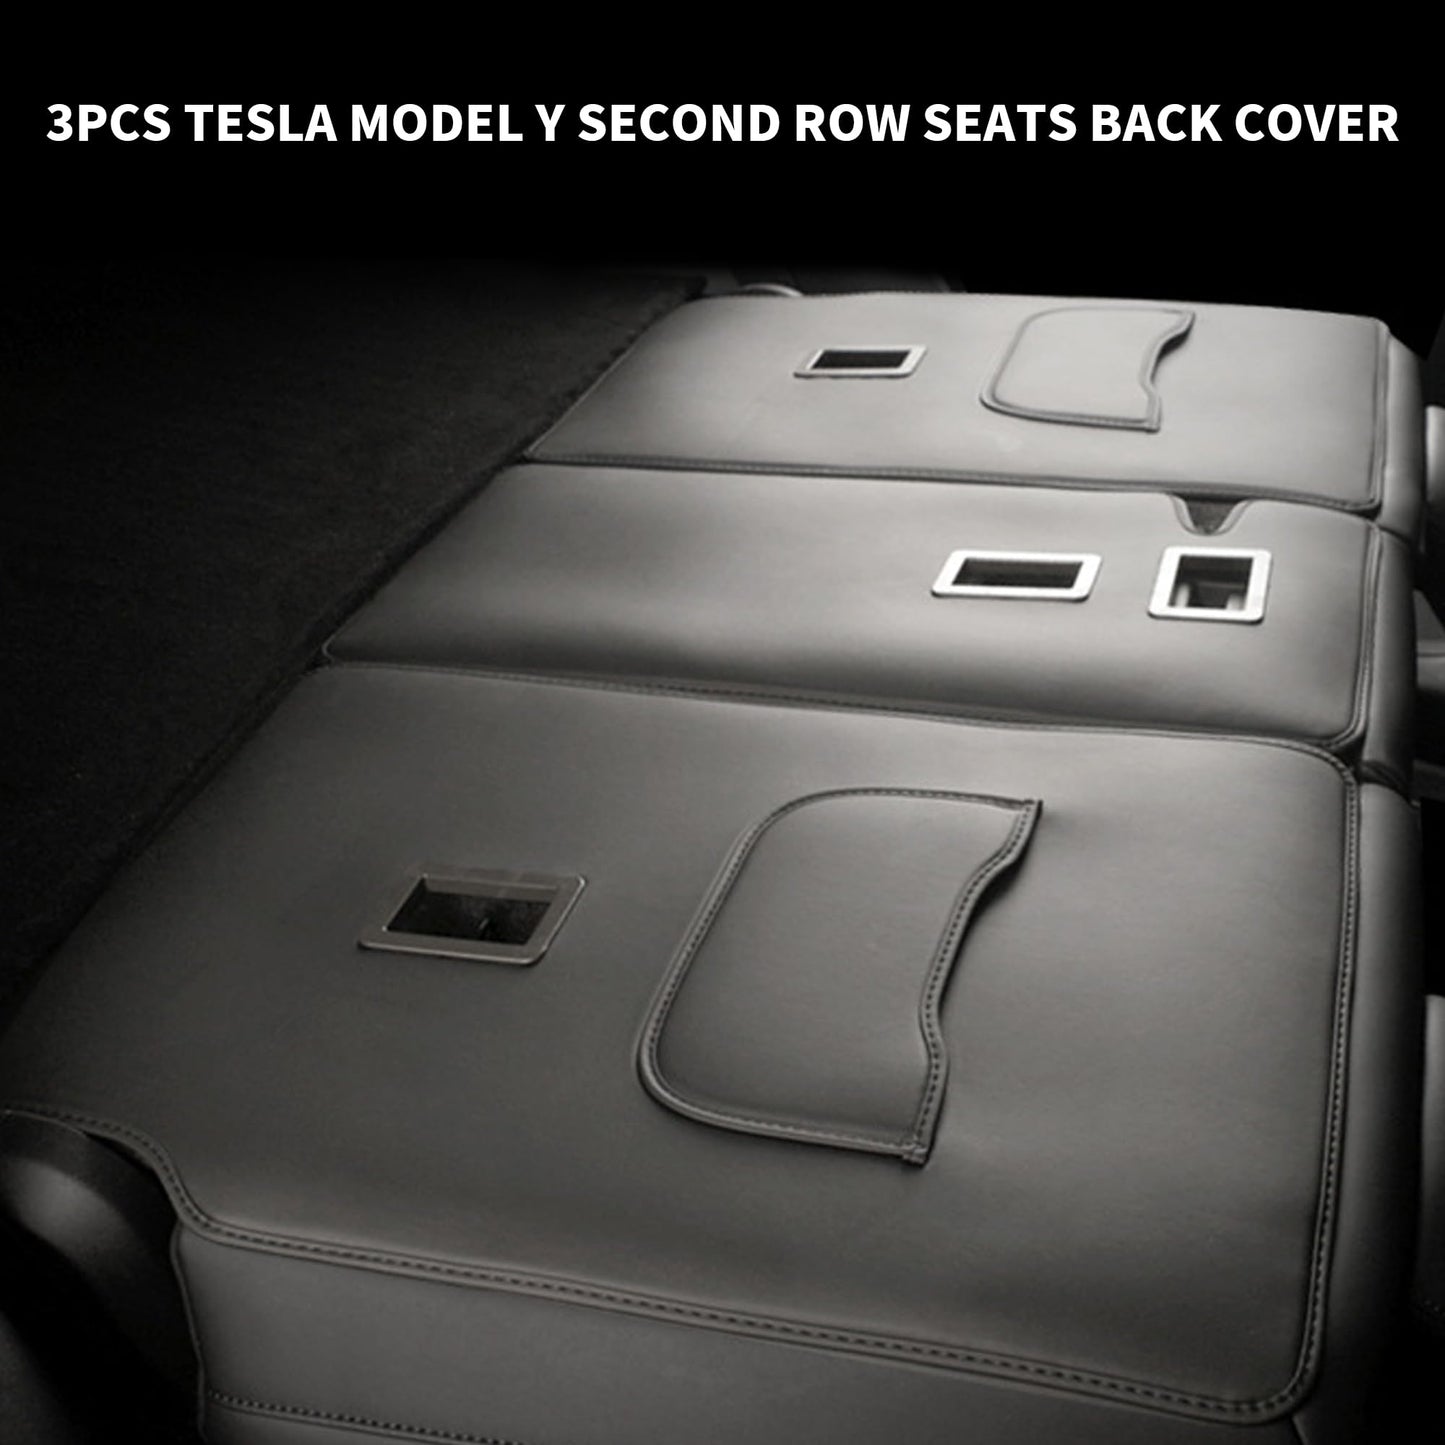 TOPABYTE Second Row Seats Back Protector Mats Leather 3PCs for 2020-2024 Model Y 5-Seats